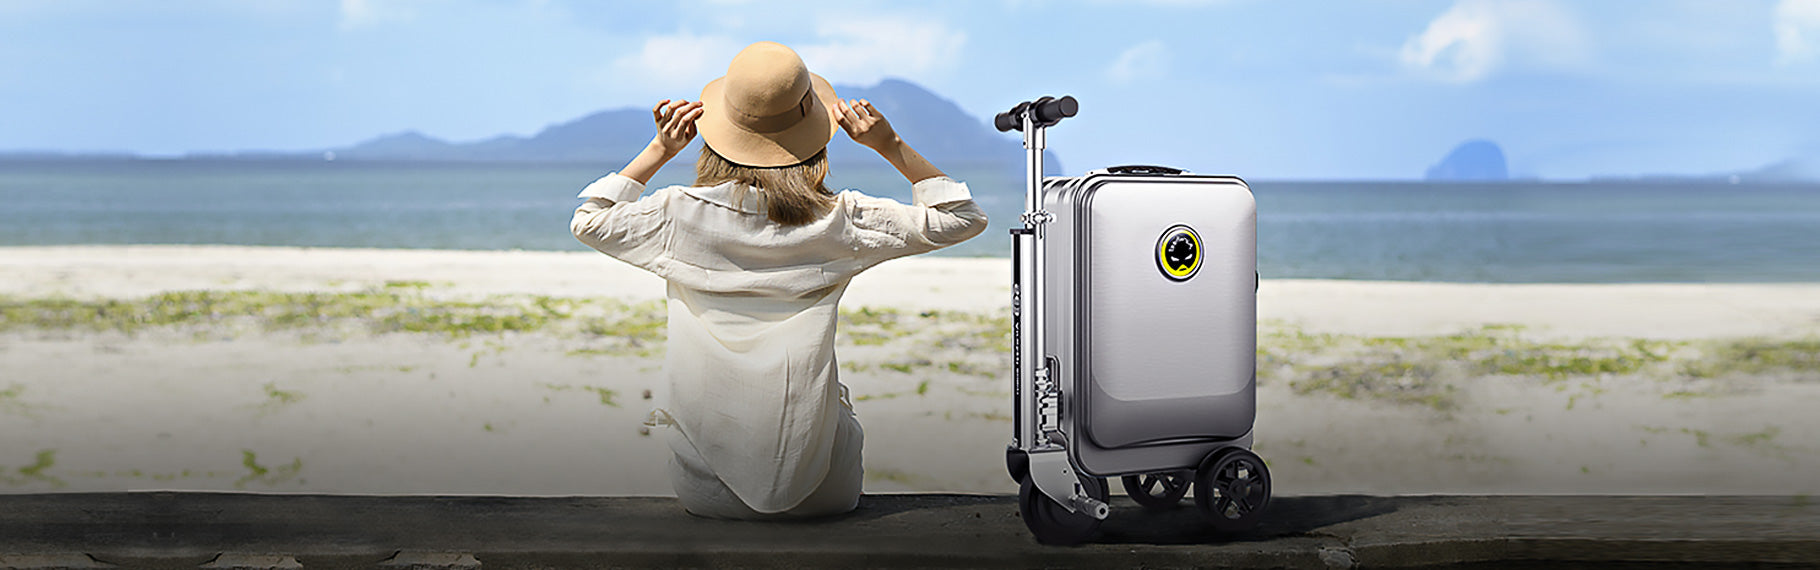 Airwheel-SE3MiniT-smart-luggage-Get-Ready-to-Ride-The-Airwheel-SE3S-Motorized-Luggage-for-Smooth-and-Stylish-Travel-06